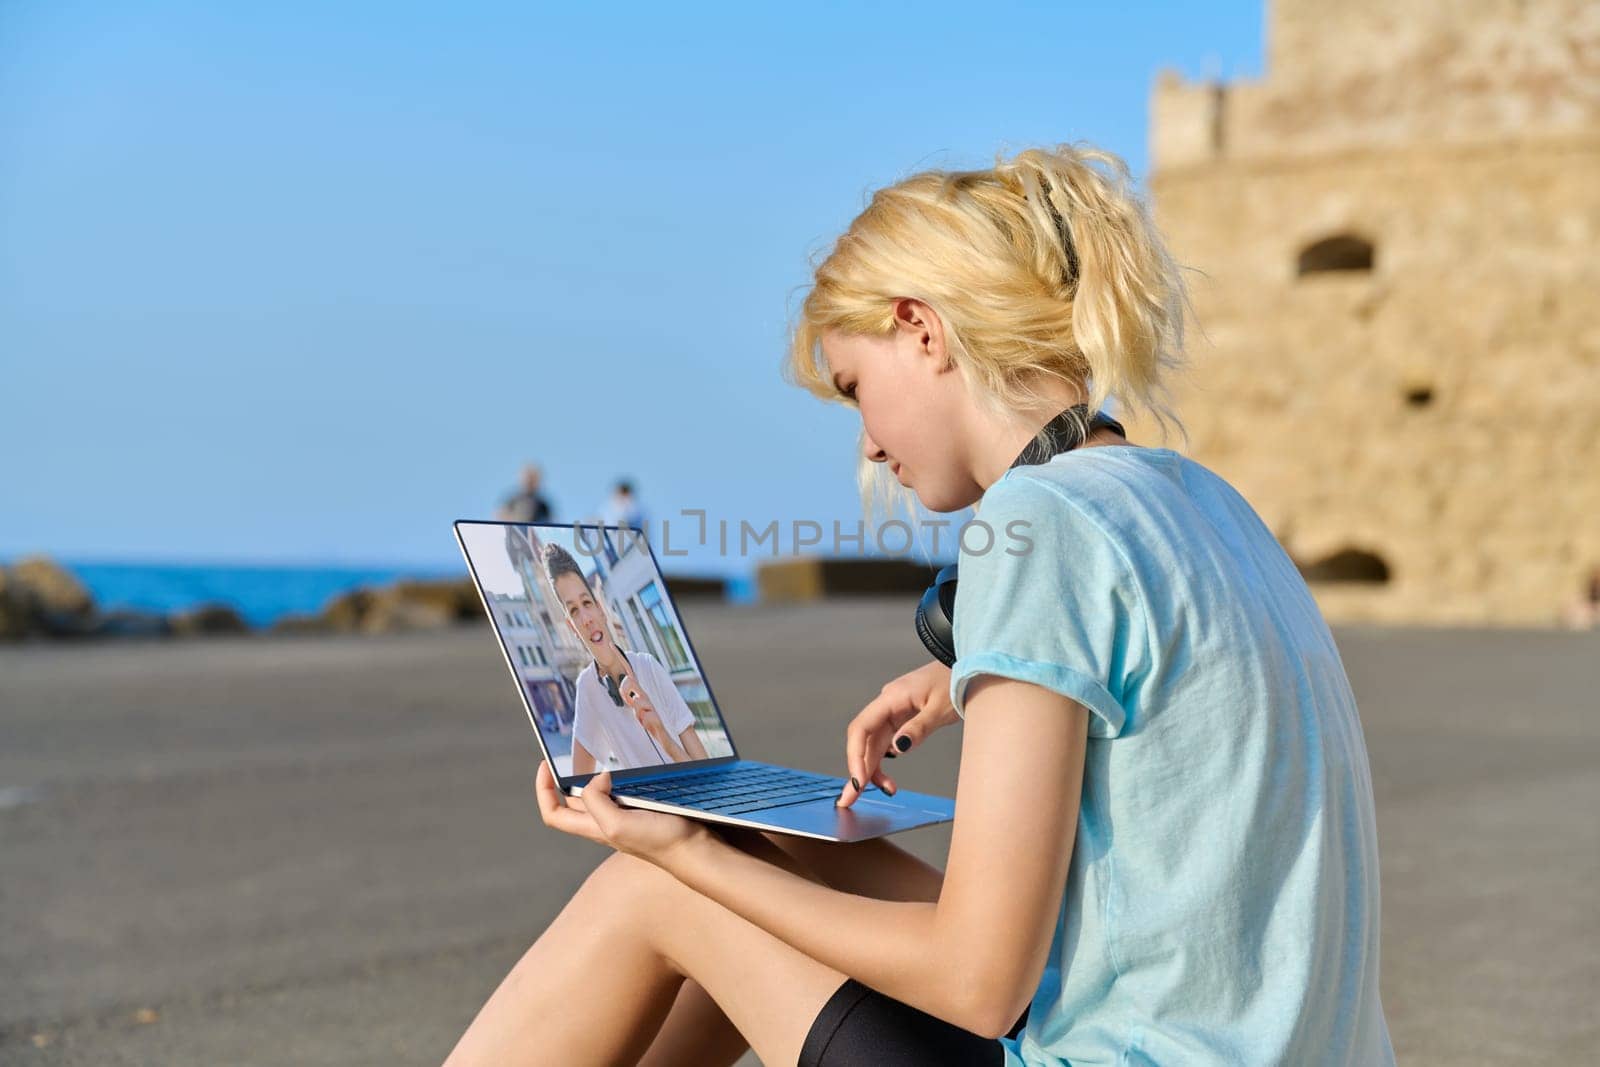 Video call on laptop, teenage friends talking online. Web chat of teenage girl sitting on seashore in European tourist destination and guy. Technology, tourism, friendship, lifestyle, young people concept